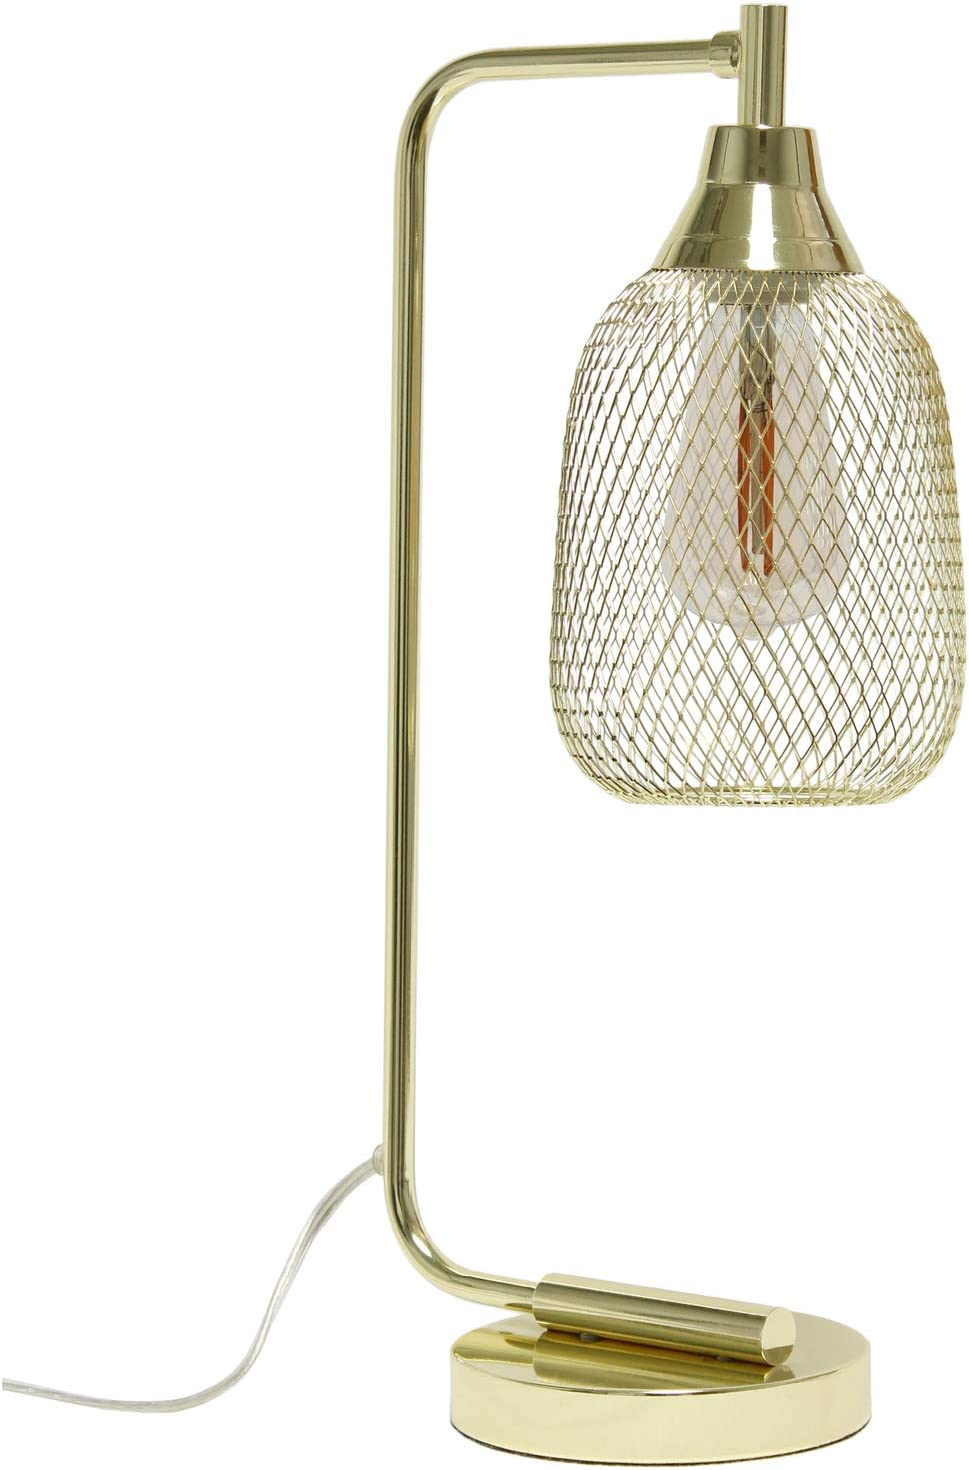 Lalia Home Industrial Office Desk Lamp with Wired Mesh Shade and Polished Gold Finish